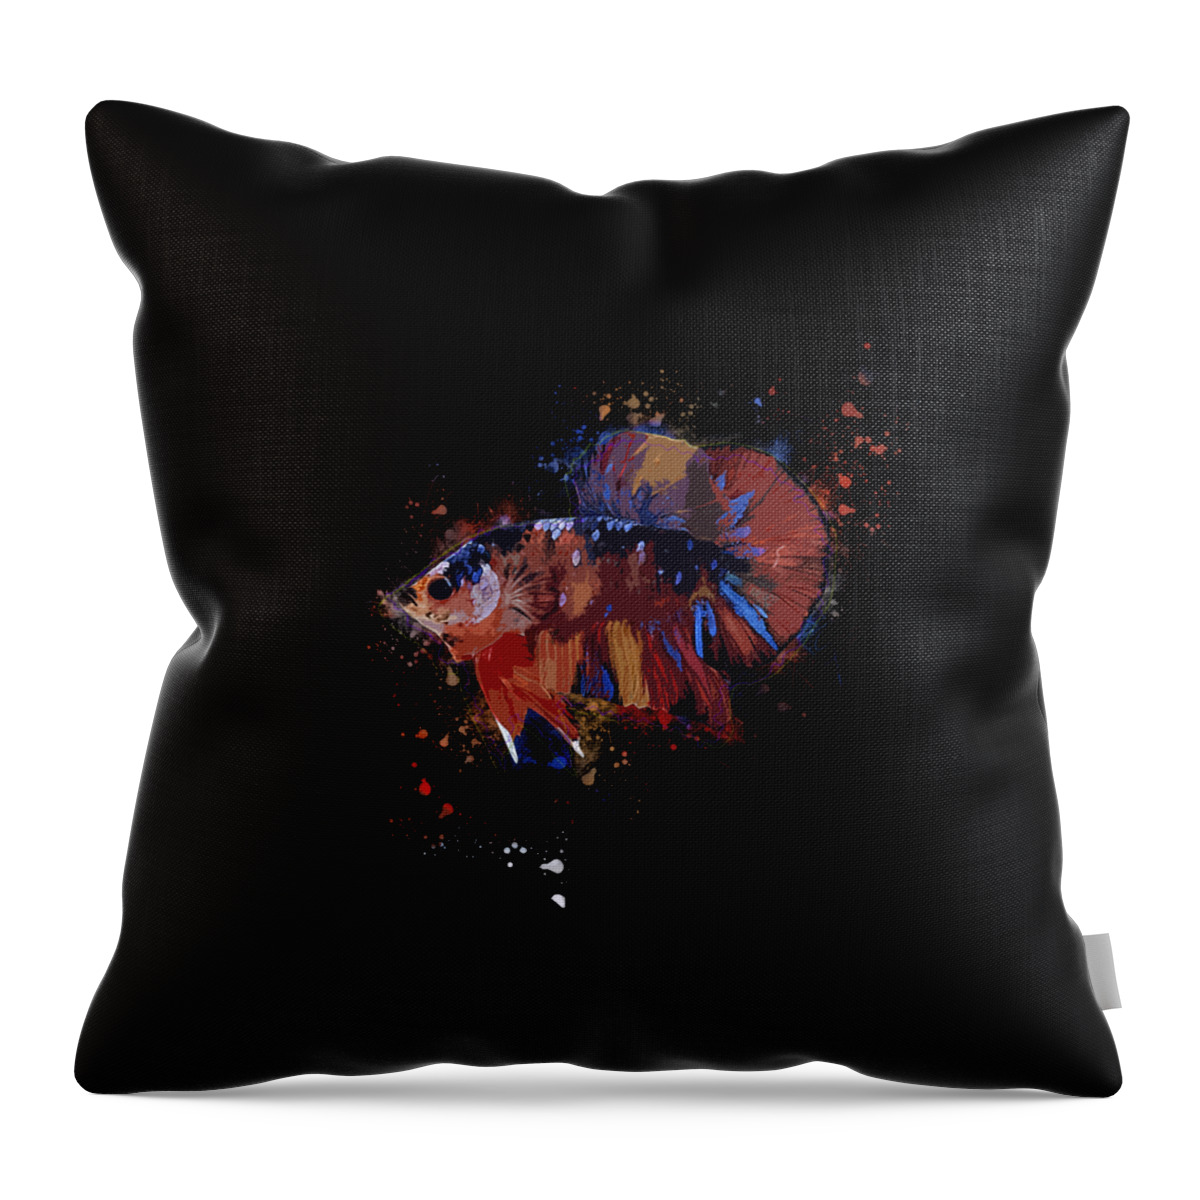 Artistic Throw Pillow featuring the digital art Artistic Multicolor Betta Fish by Sambel Pedes